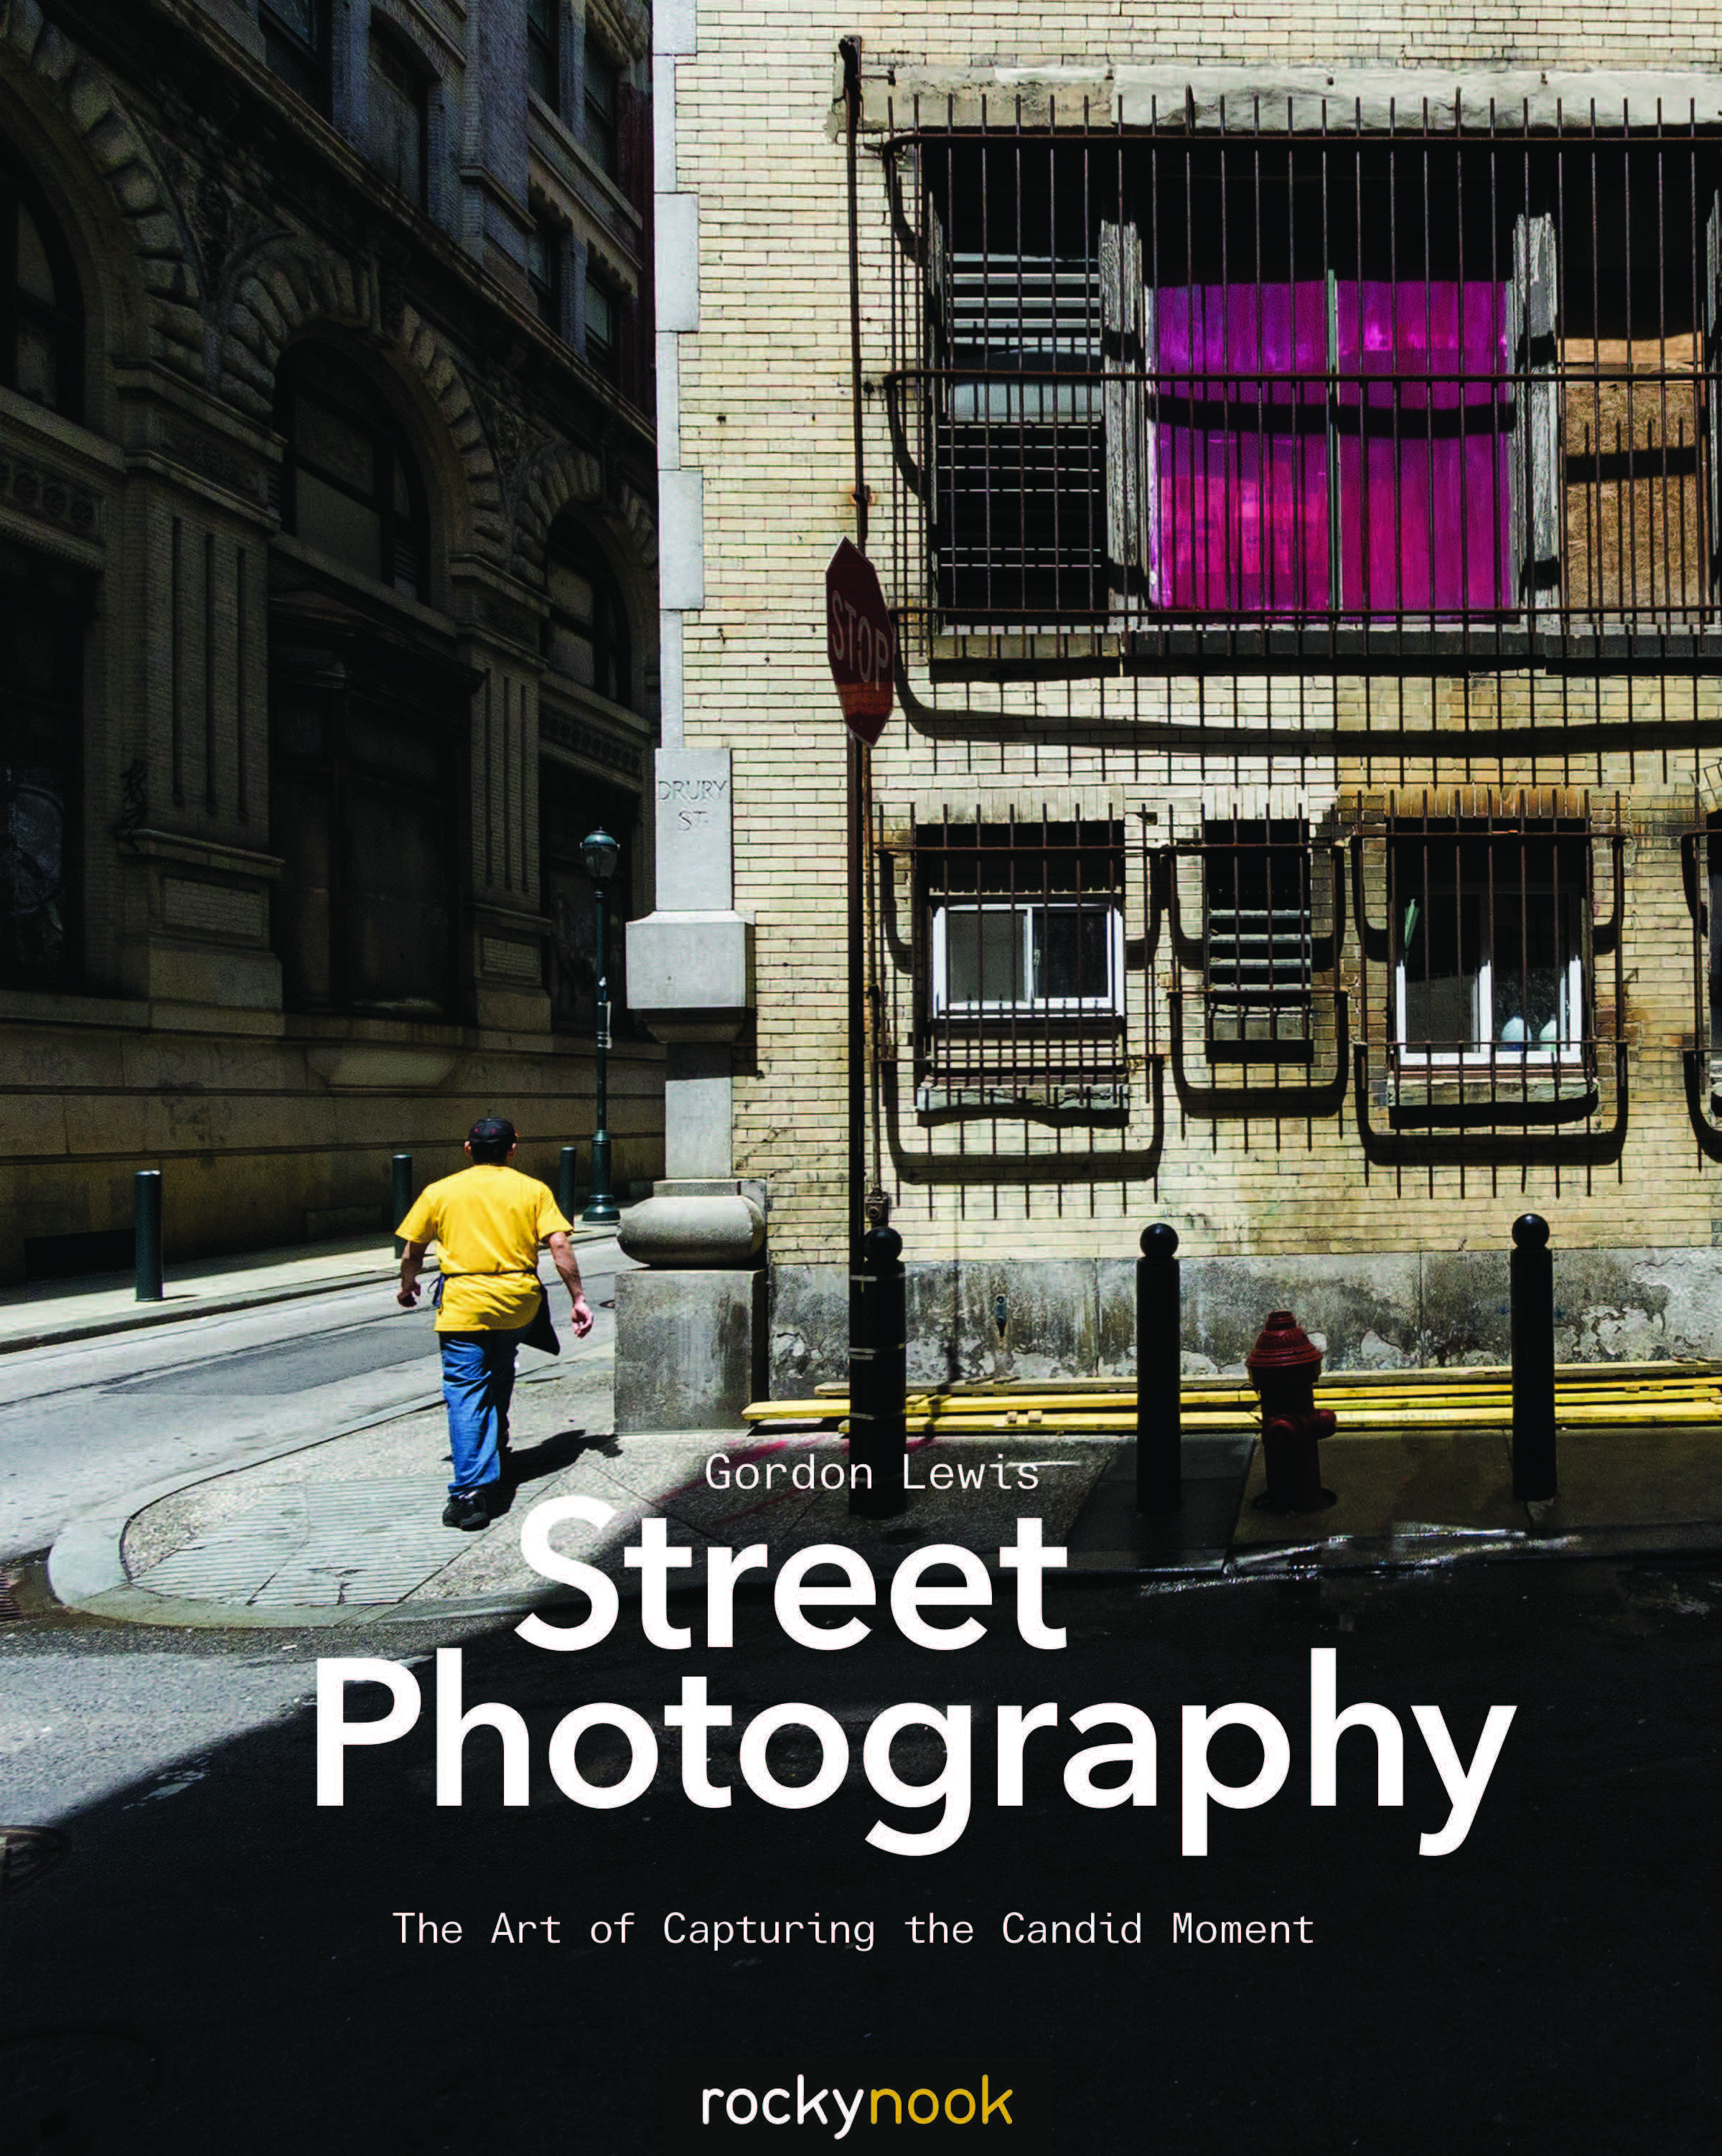 Street Photography: The Art of Capturing the Candid Moment